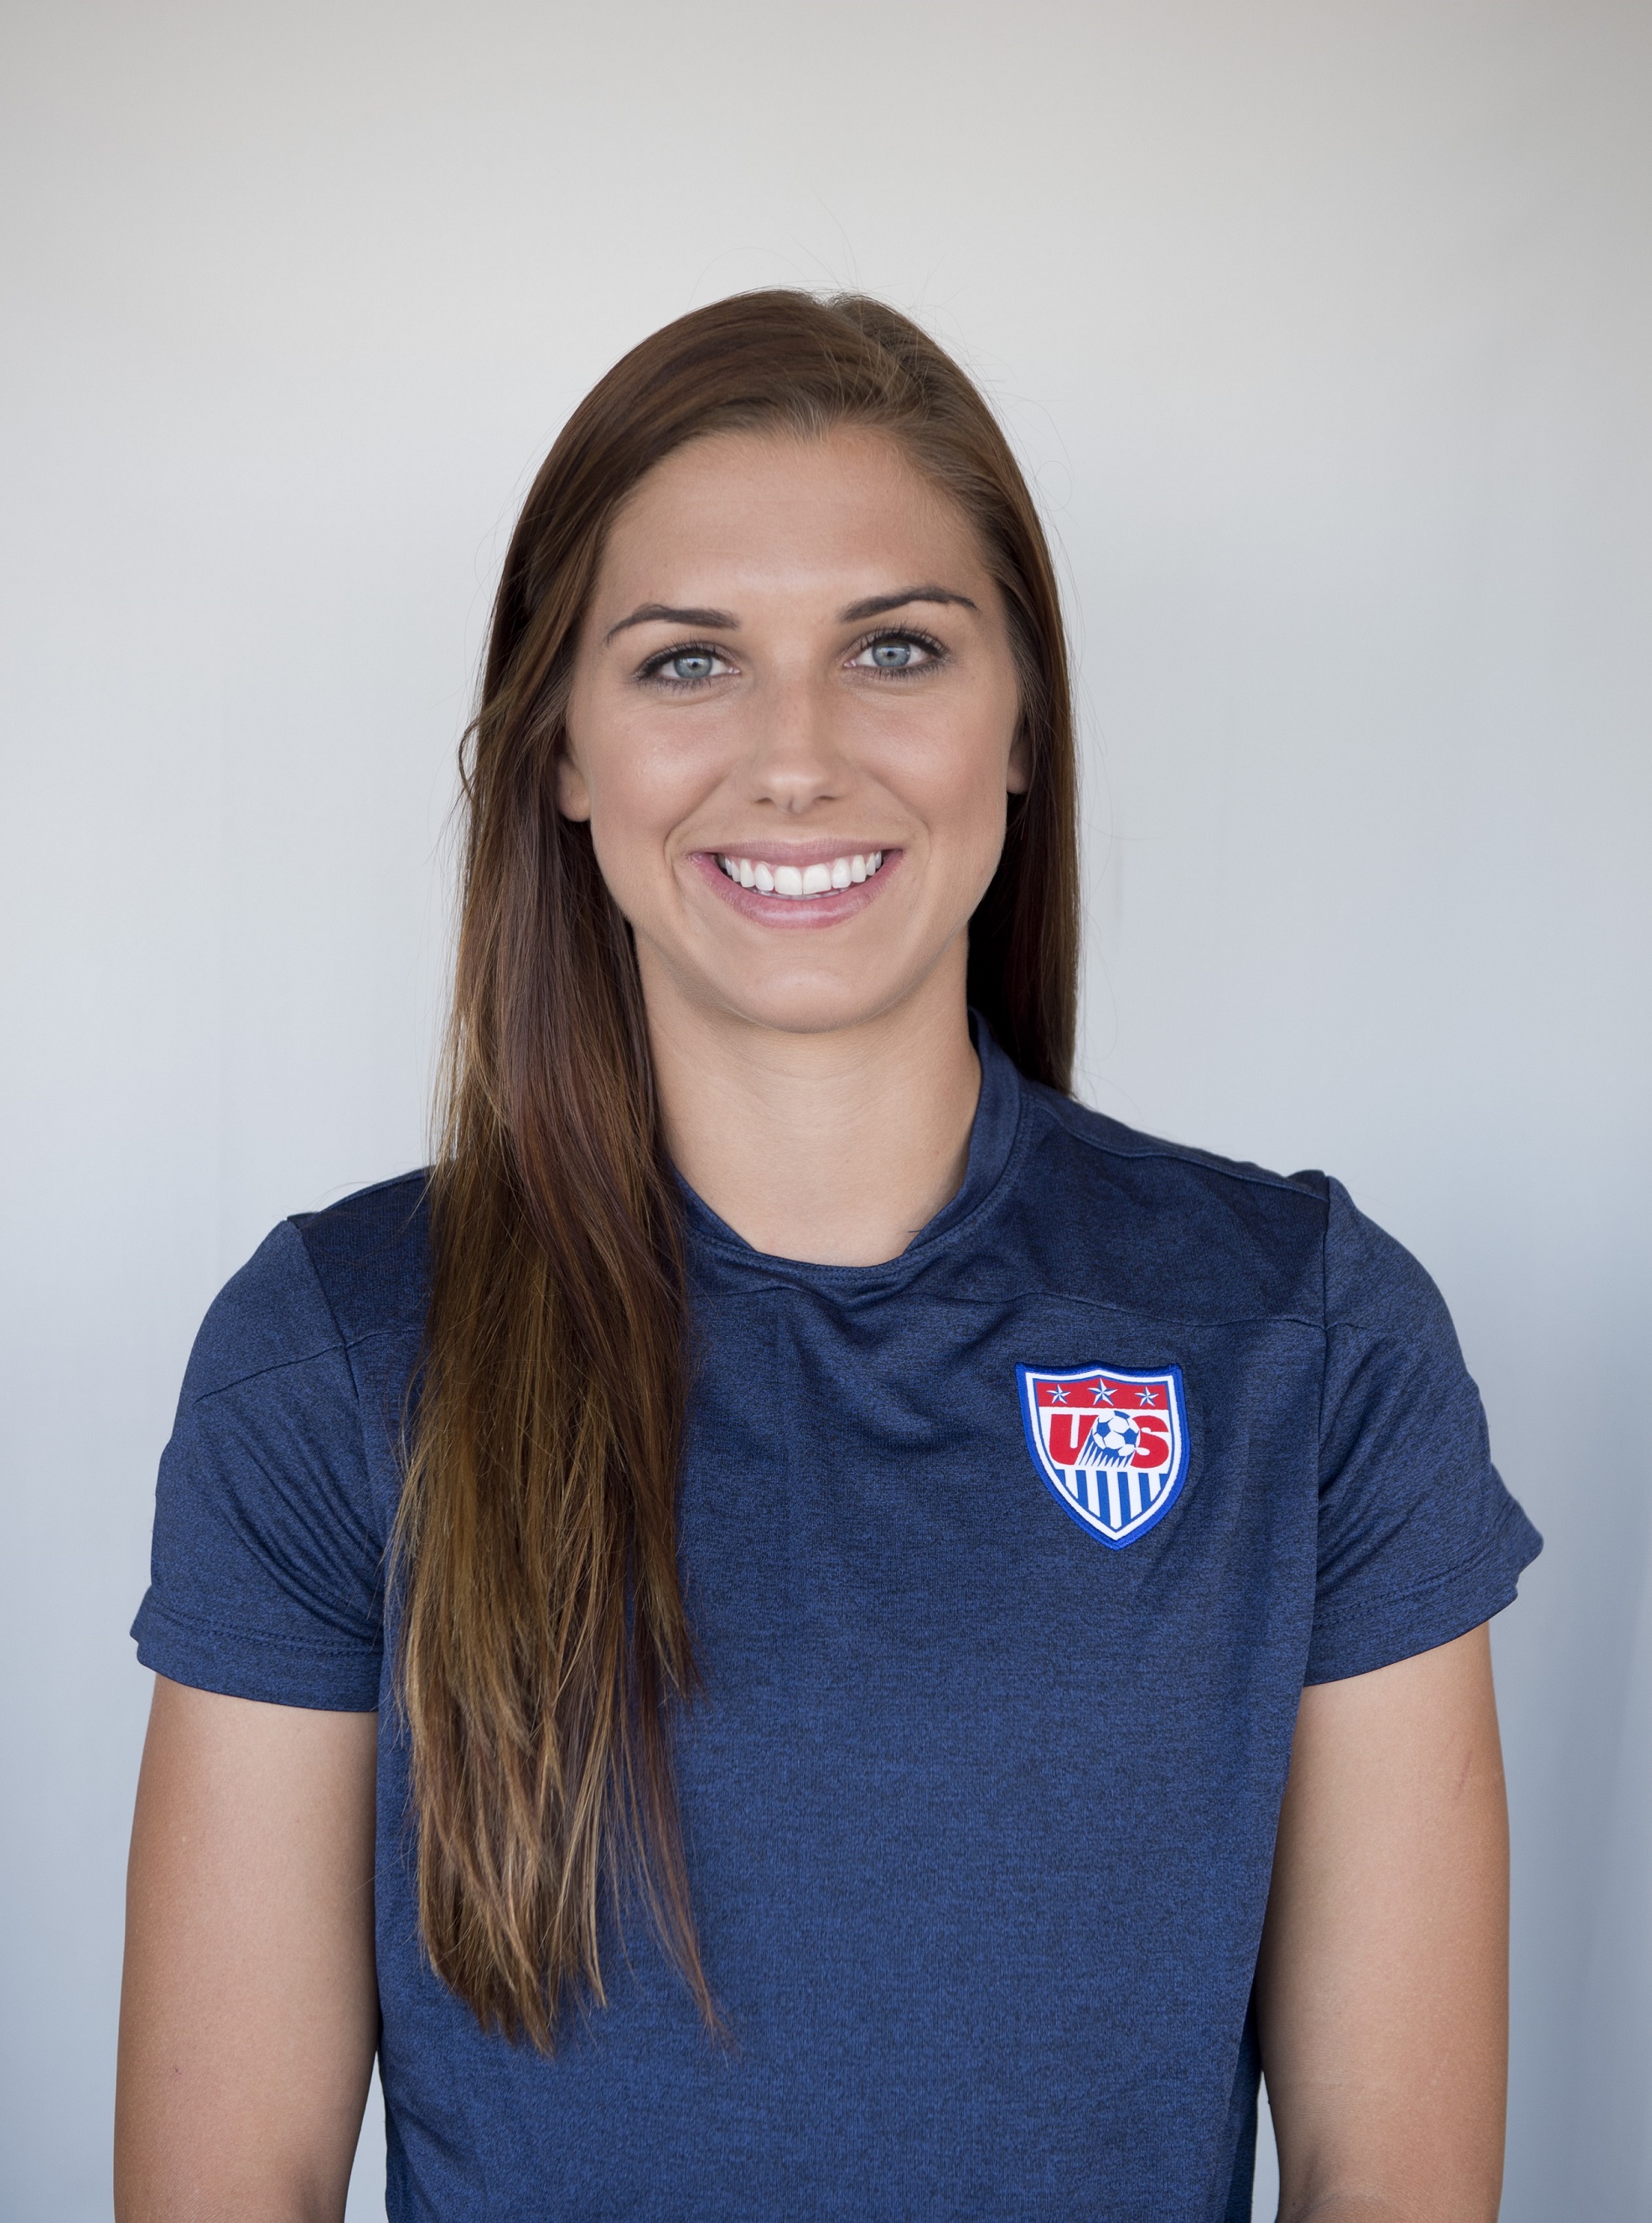 Alex Morgan Hottest Bikini Images, Topless Wallpapers Gallery